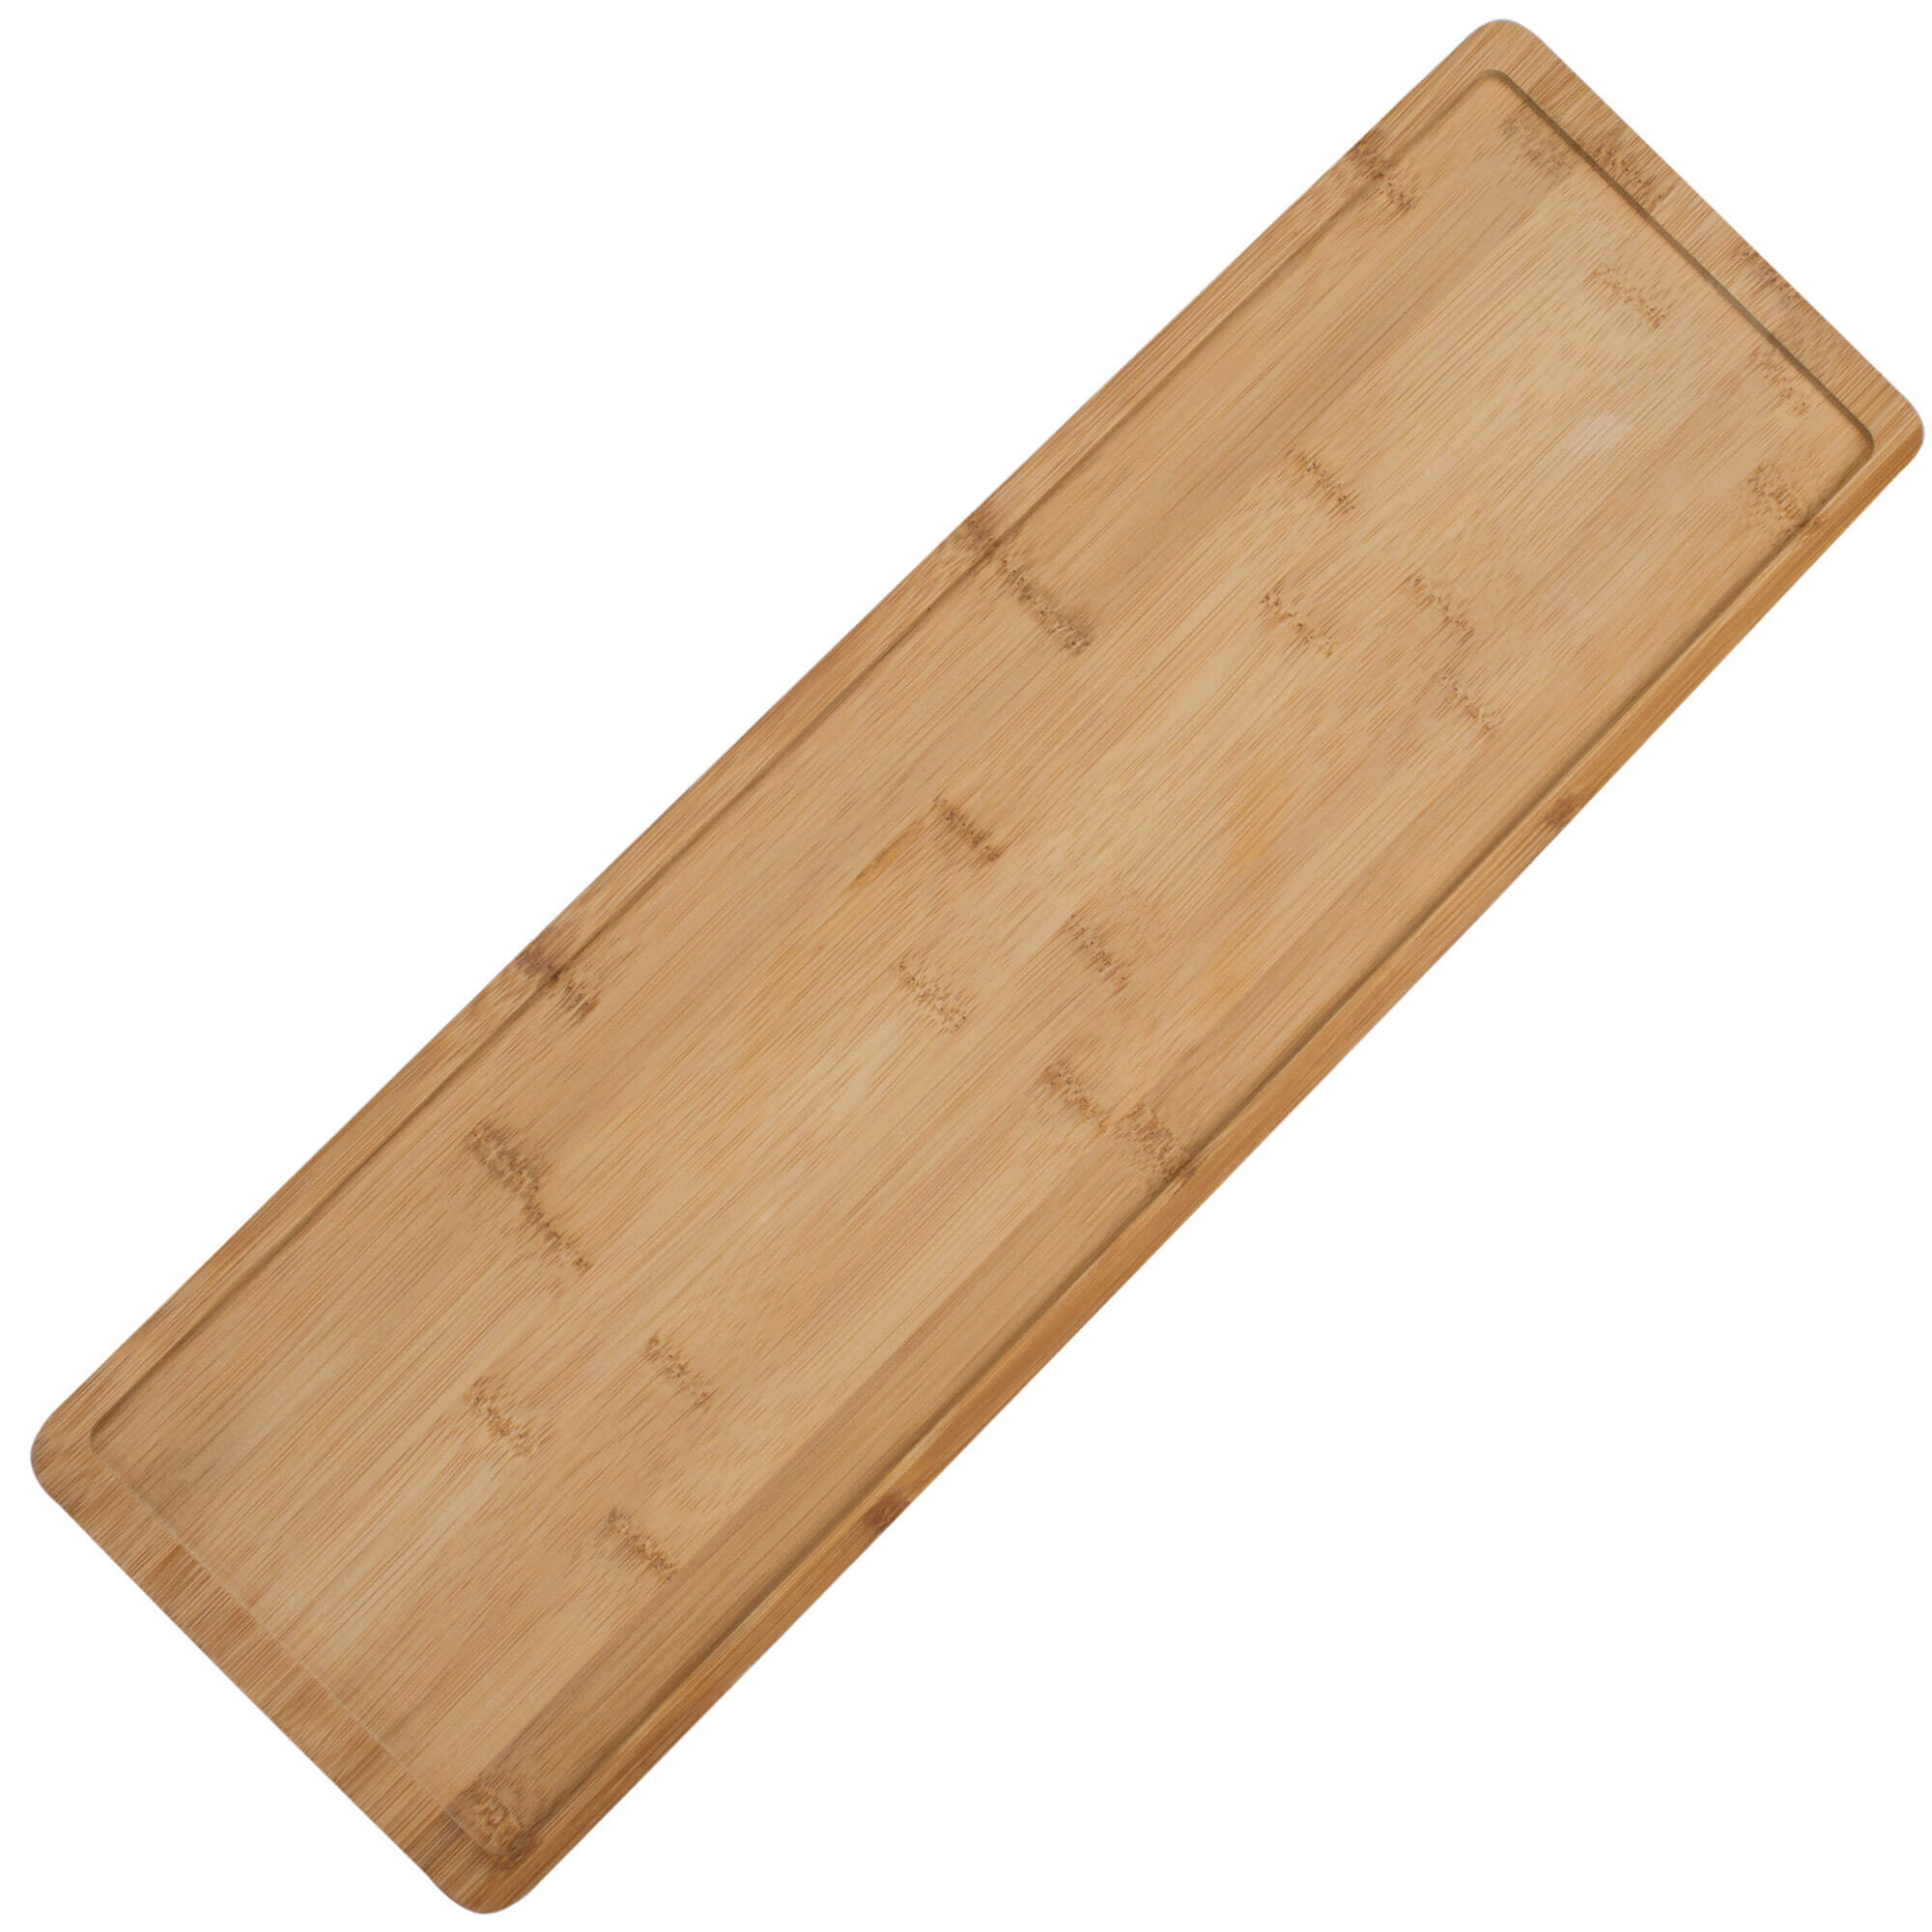 Serving tray bamboo - 53x16,2cm